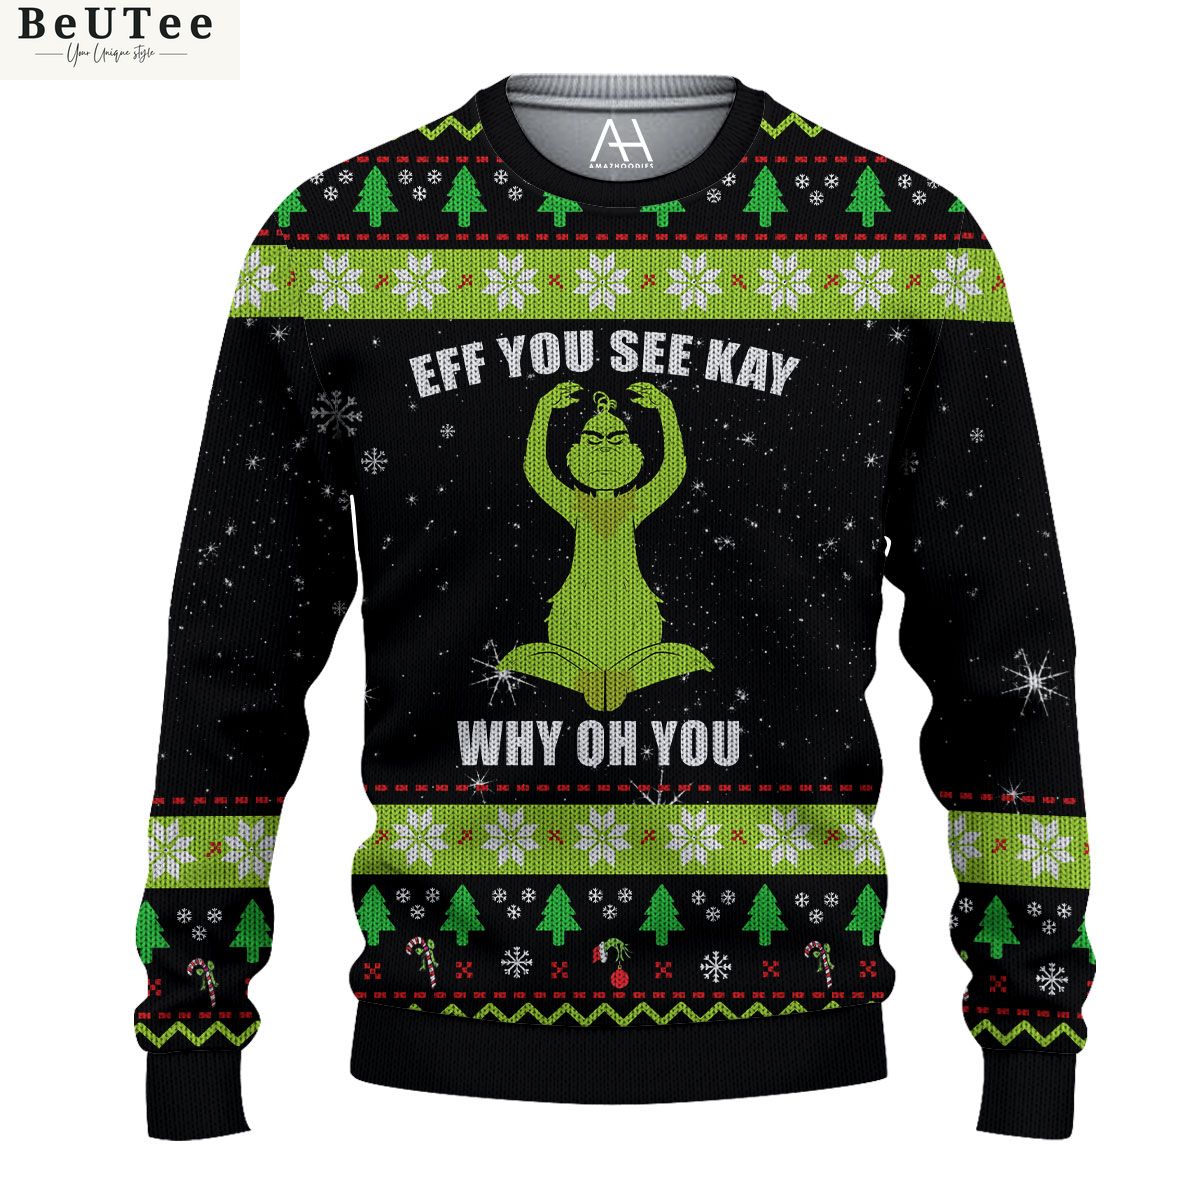 eff you see kay grinch 3d ugly sweater jumper 1 5mpua.jpg